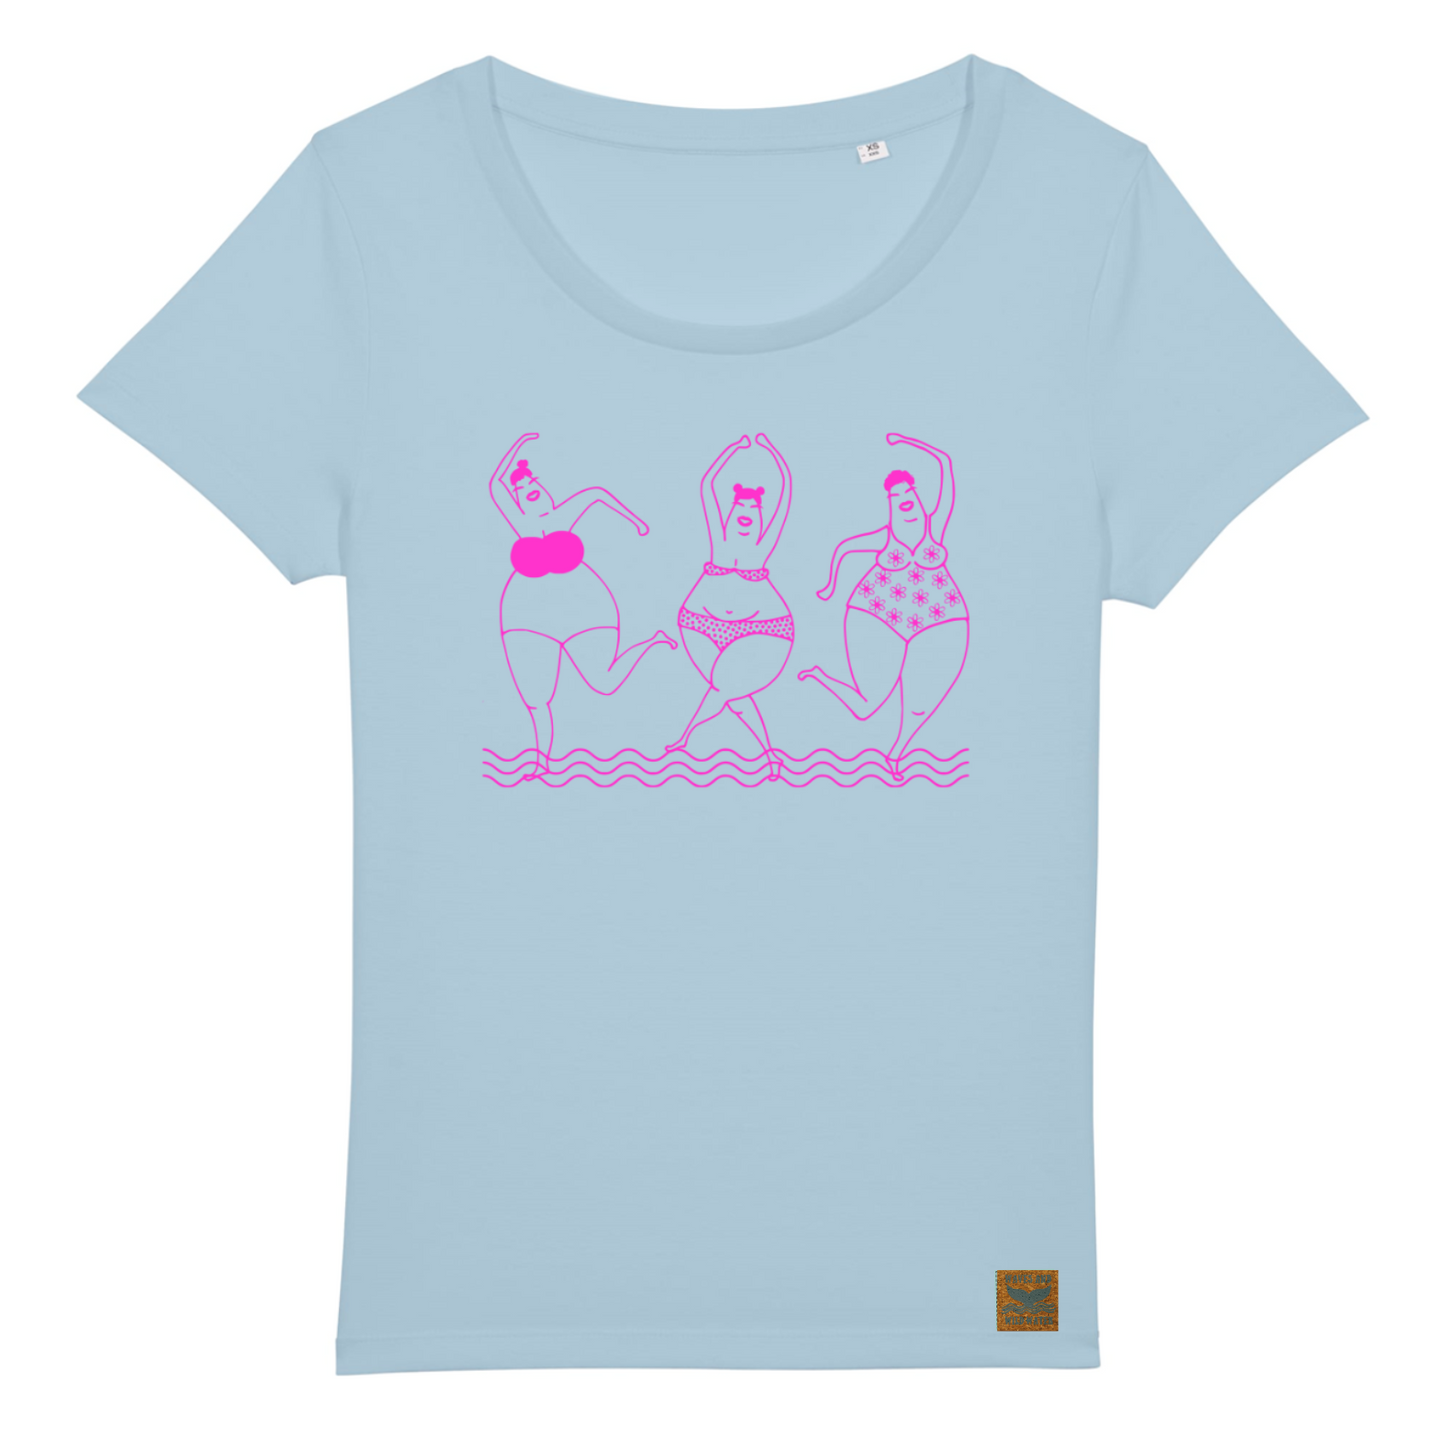 A sky blue t-shirt with a design showing three women dancing in swimwear printed on it in pink.